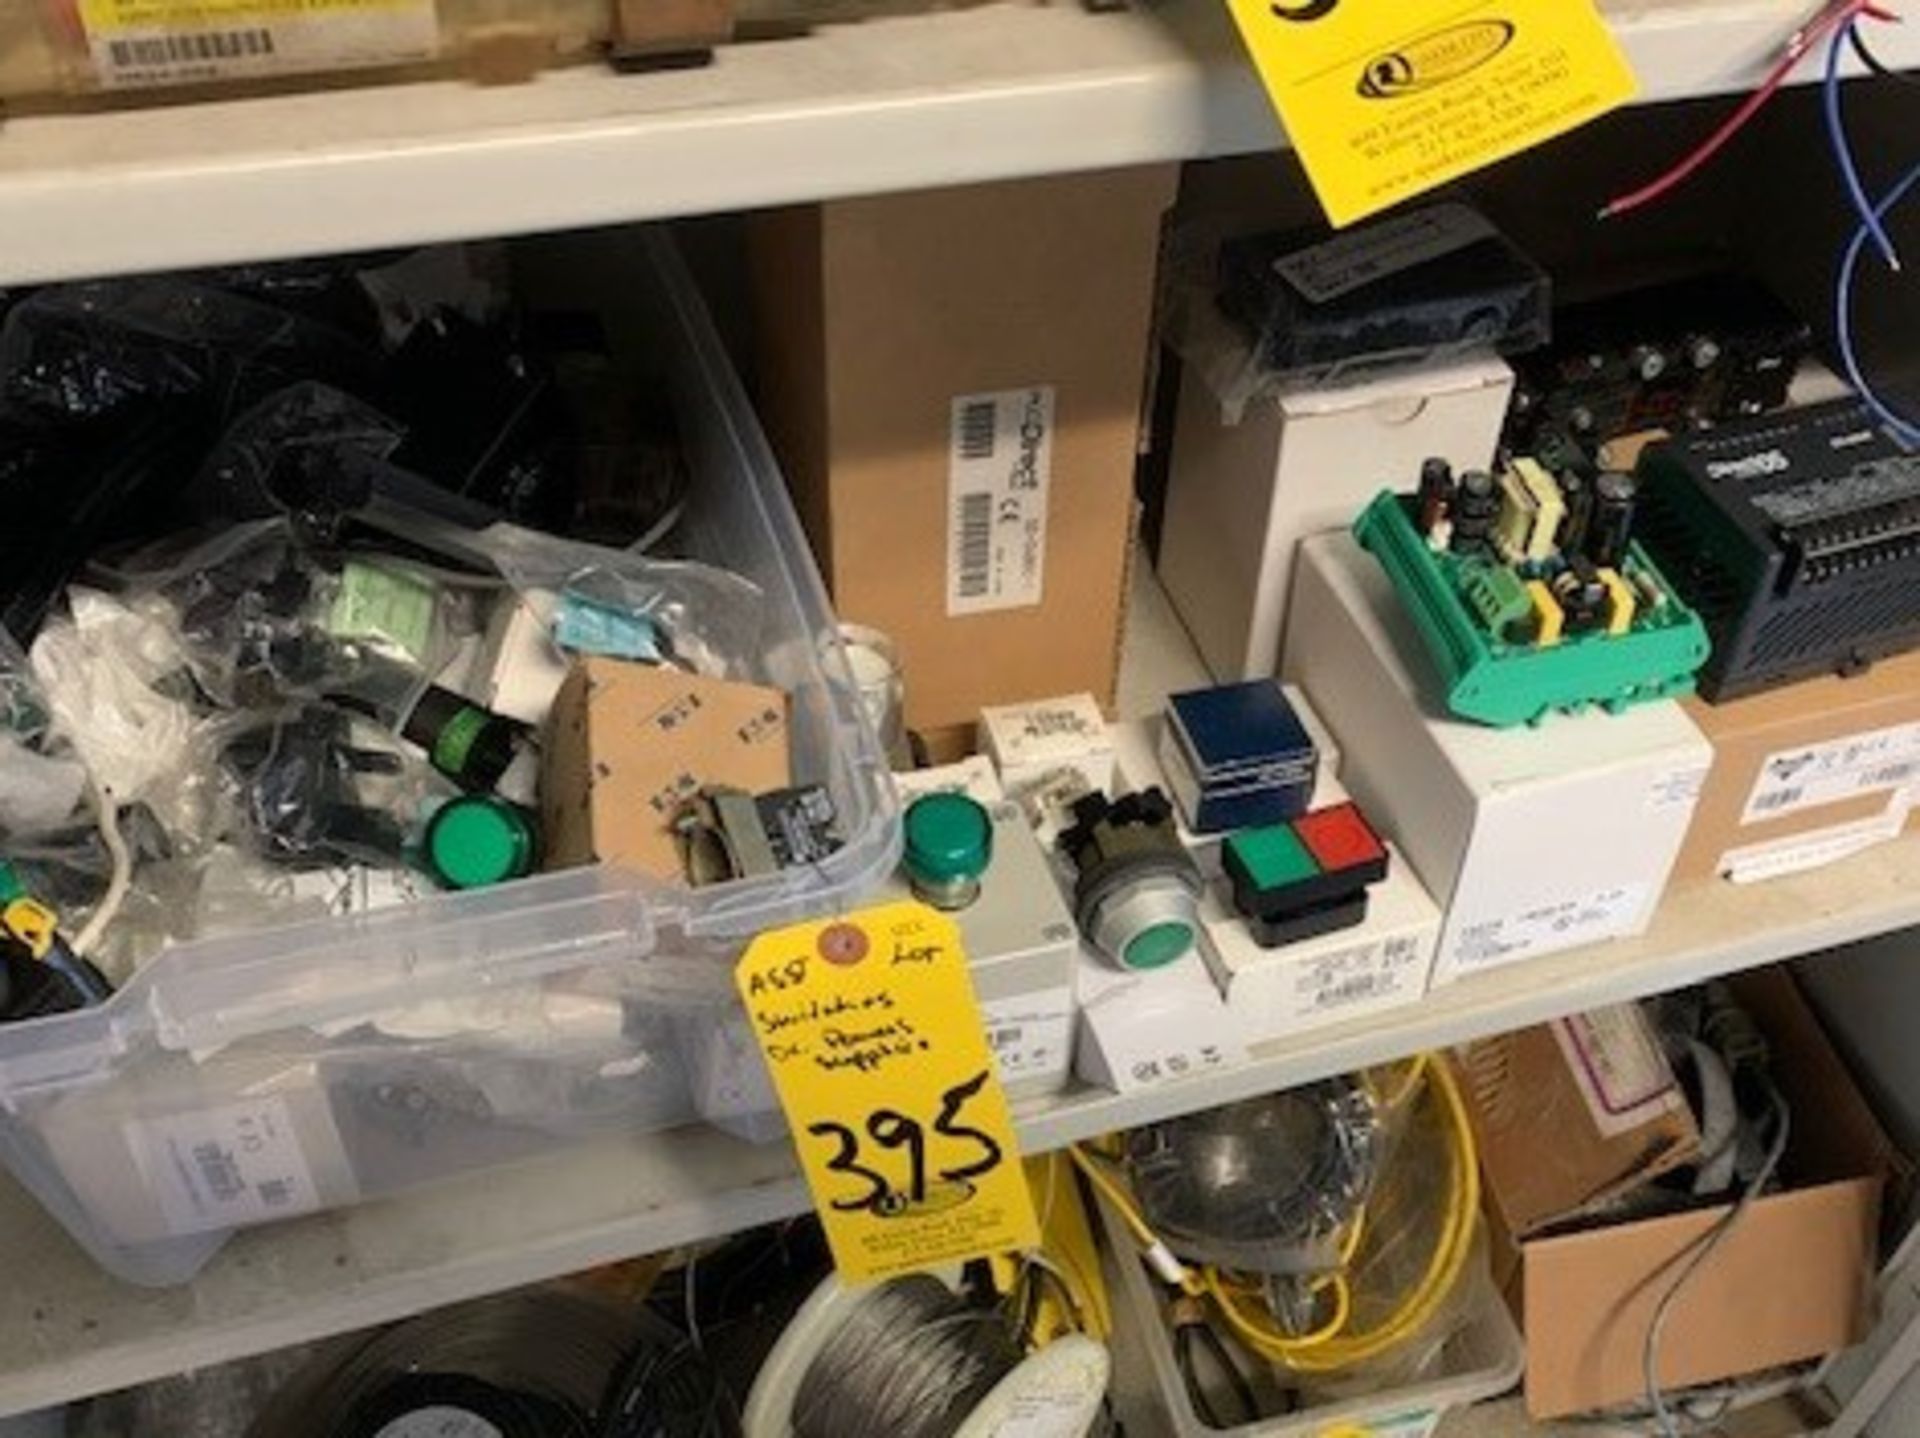 ASSORTED SWITCHES, POWER SUPPLIES, ON/OFF BUTTONS AND PLUGS